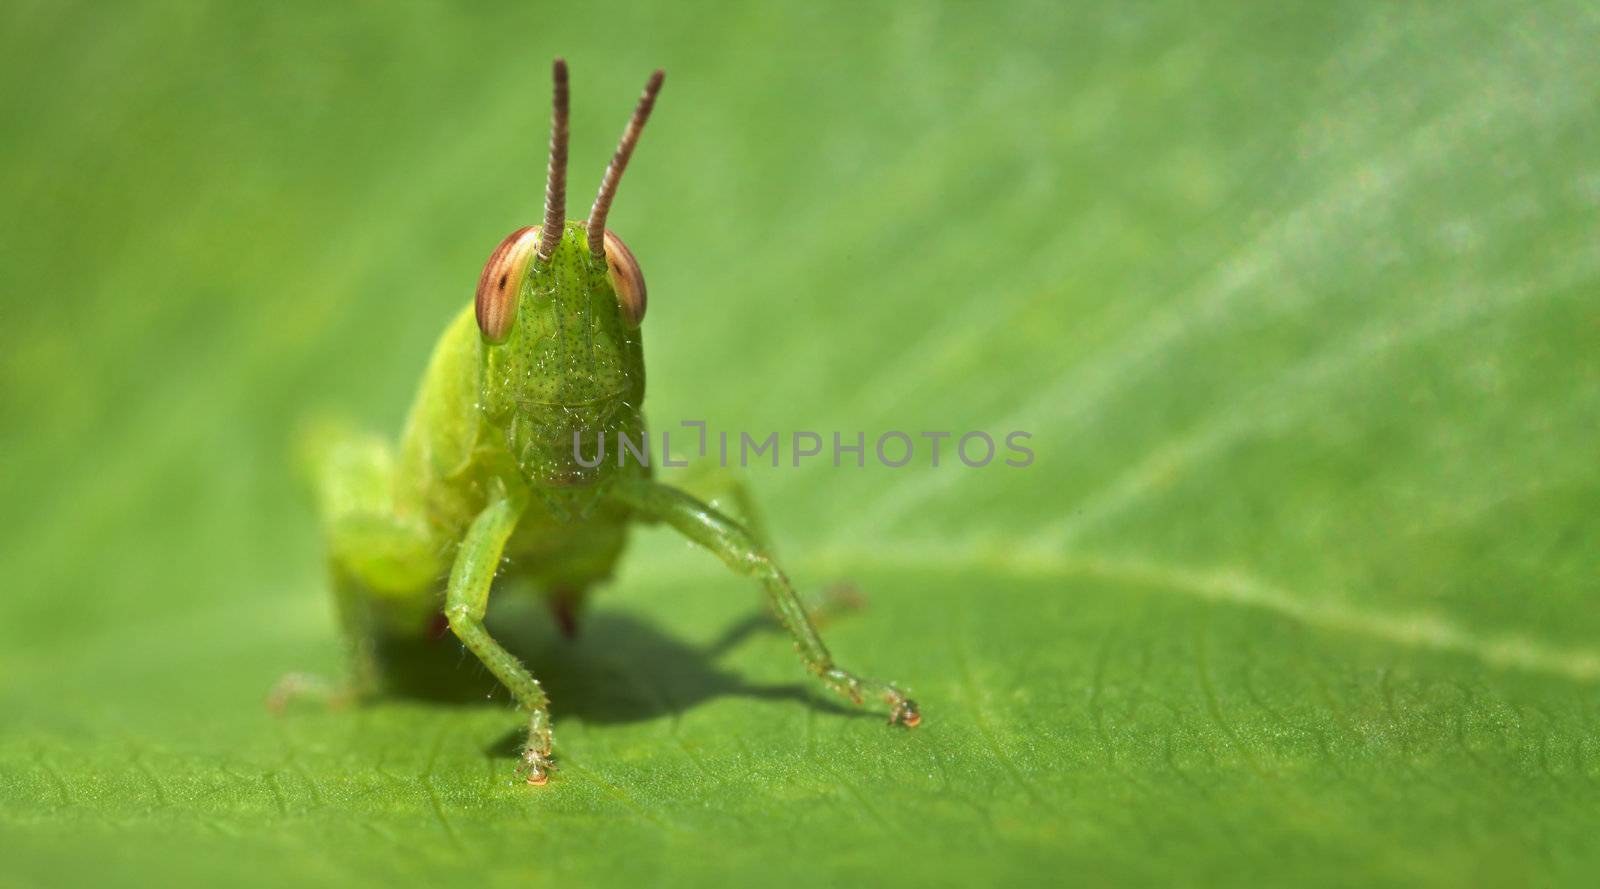 Small green funny grasshopper sitting on a green leaf - business card format